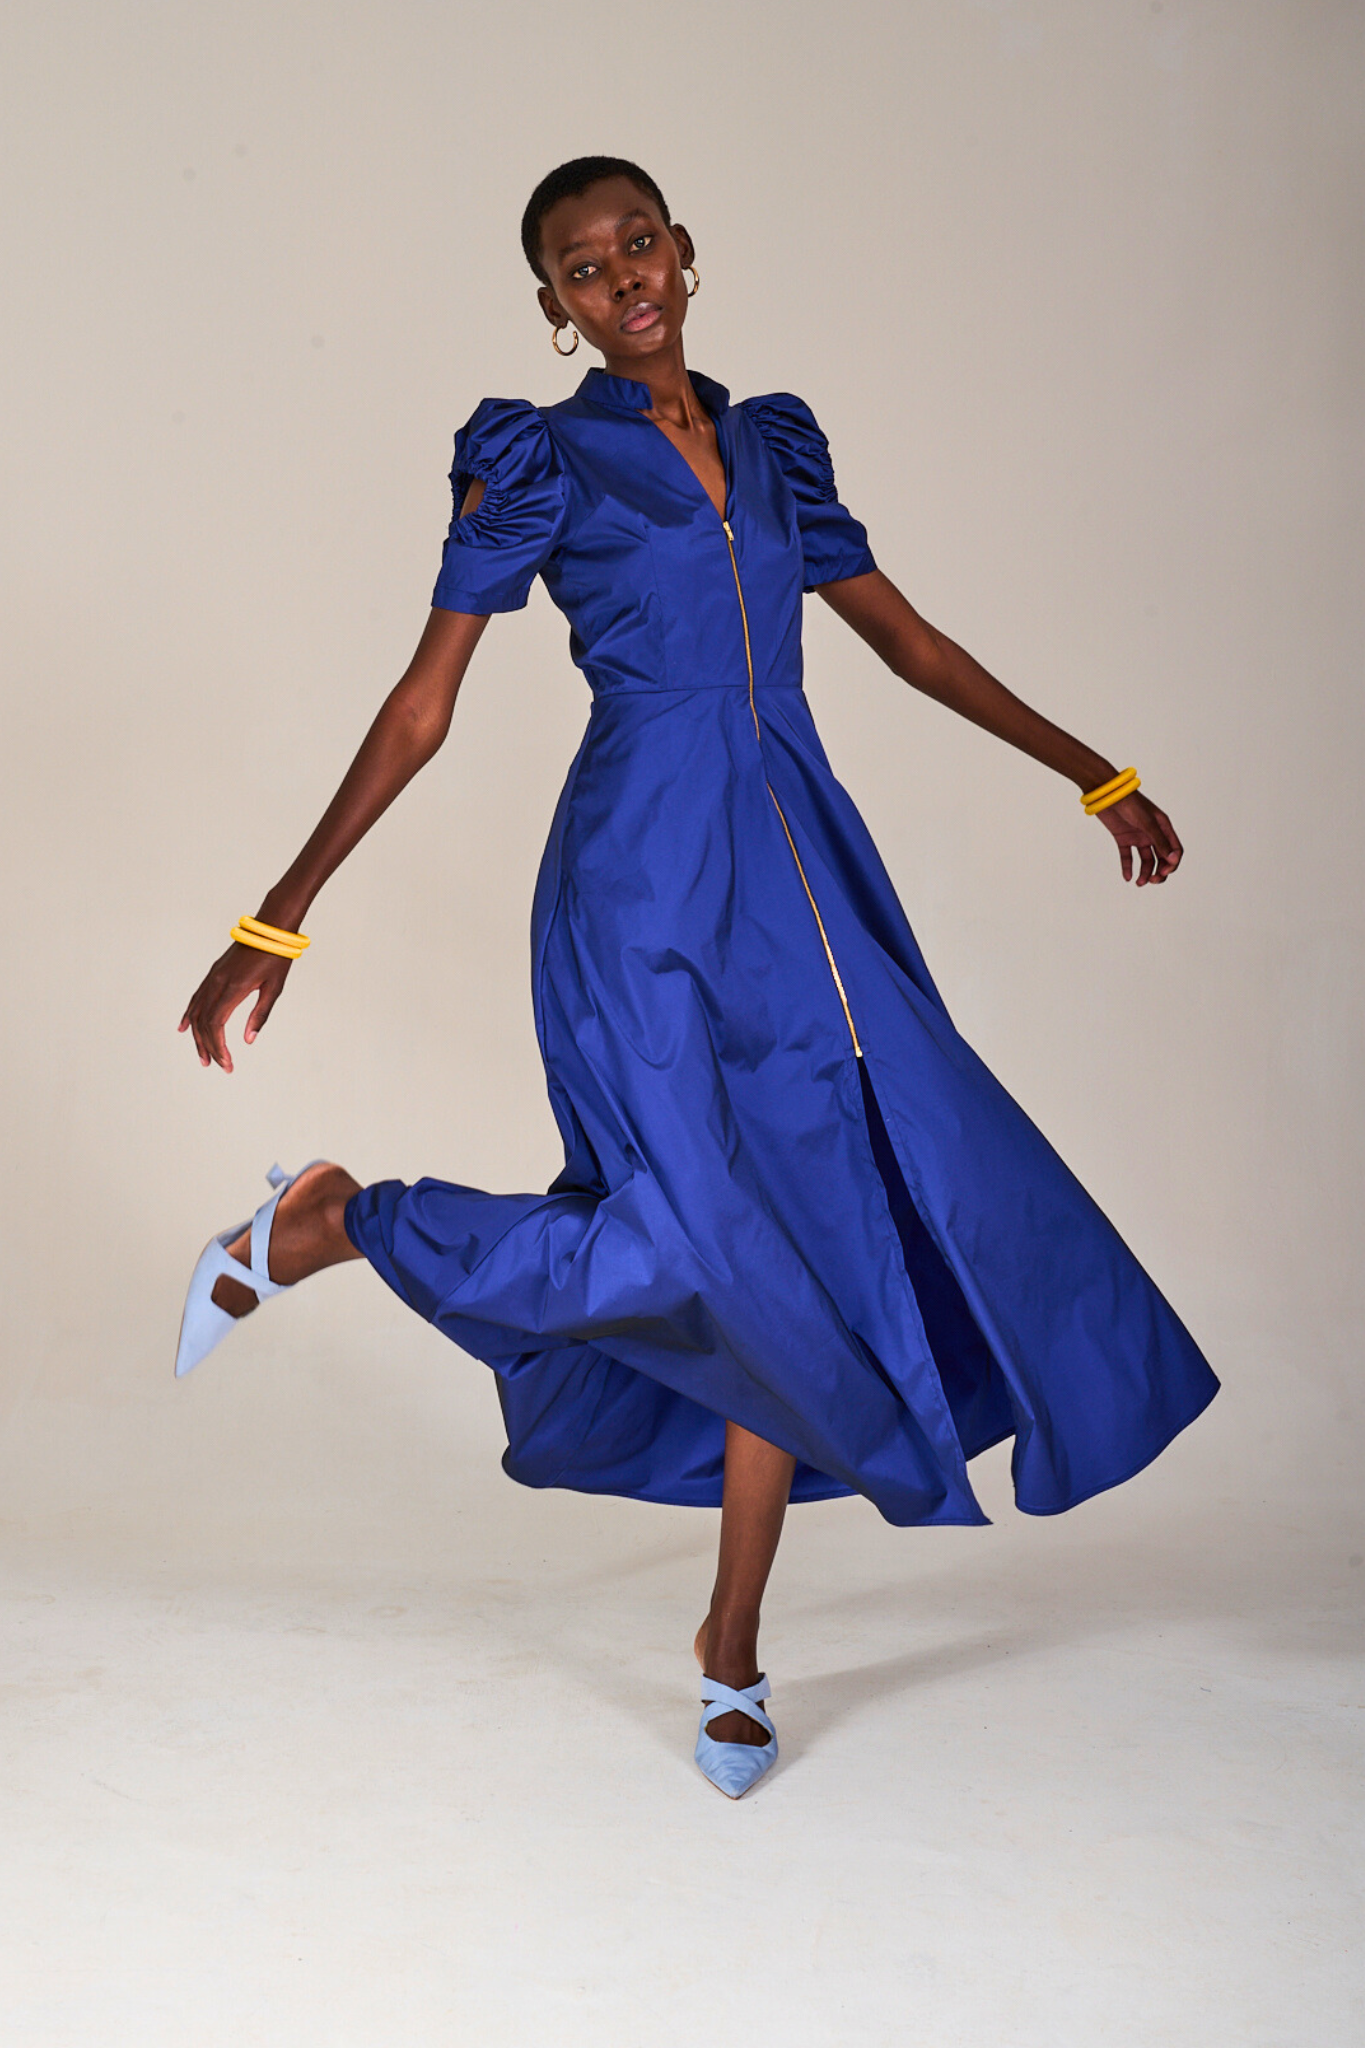 Model standing on one foot wearing The KAHINDO Nines Blue Dress, styled with pale blue heels